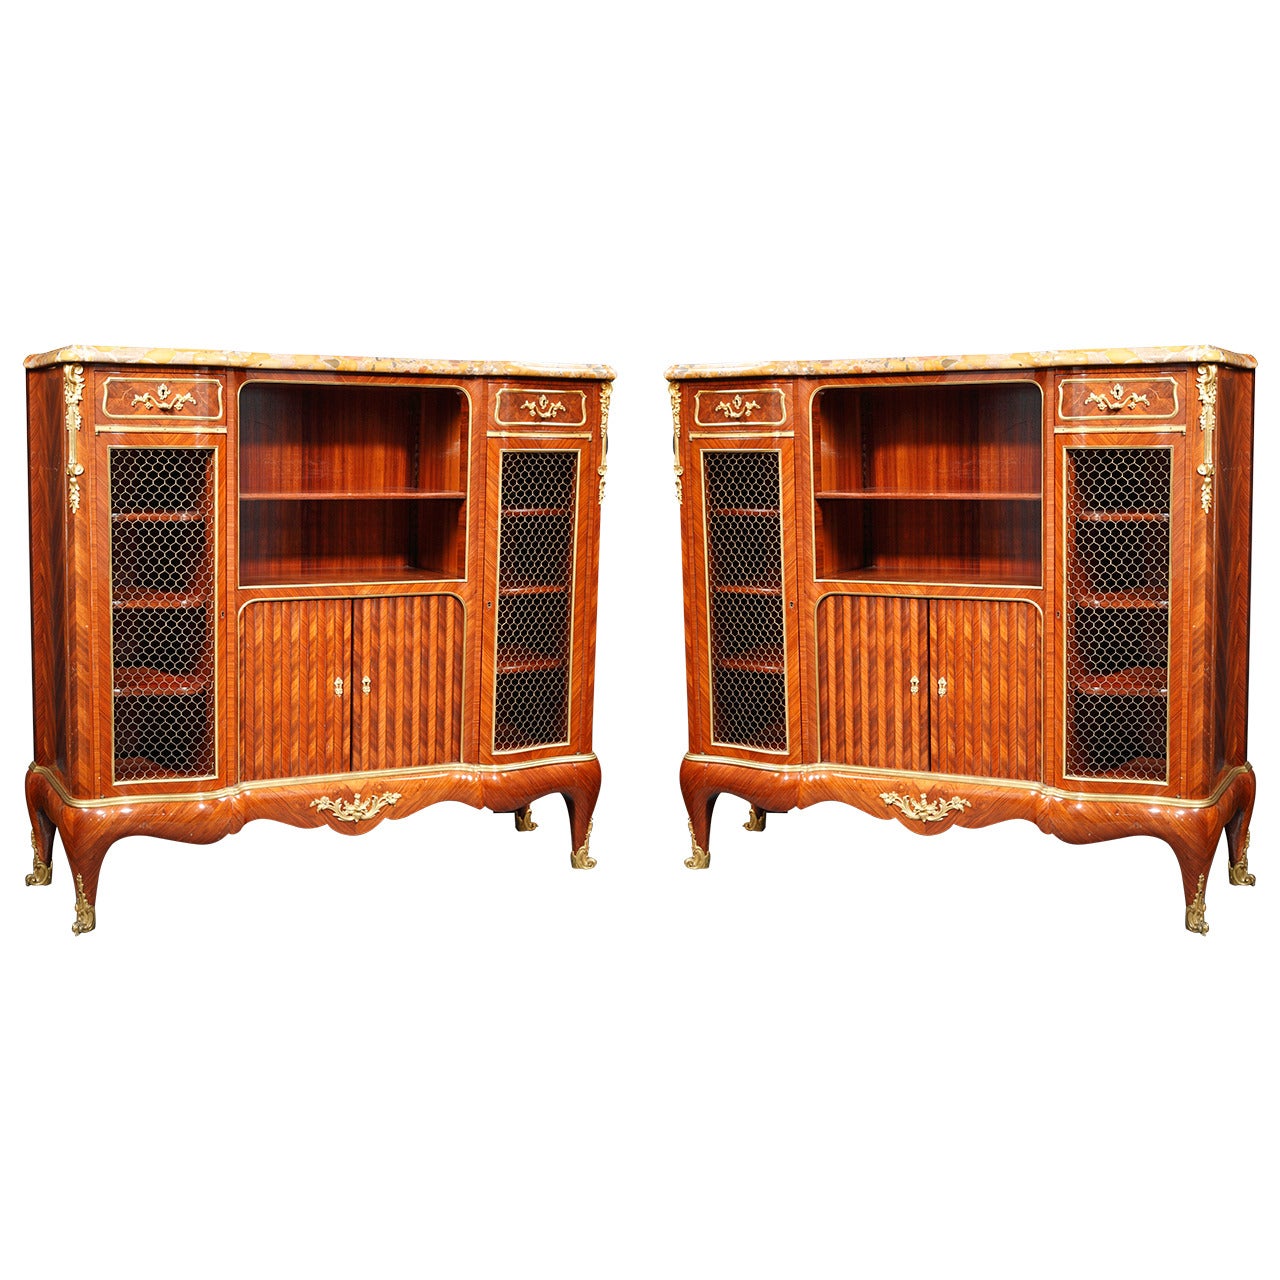 Rare Pair of Bookcase-Cabinets by P. Sormani, Signed and Stamped, circa 1870 For Sale